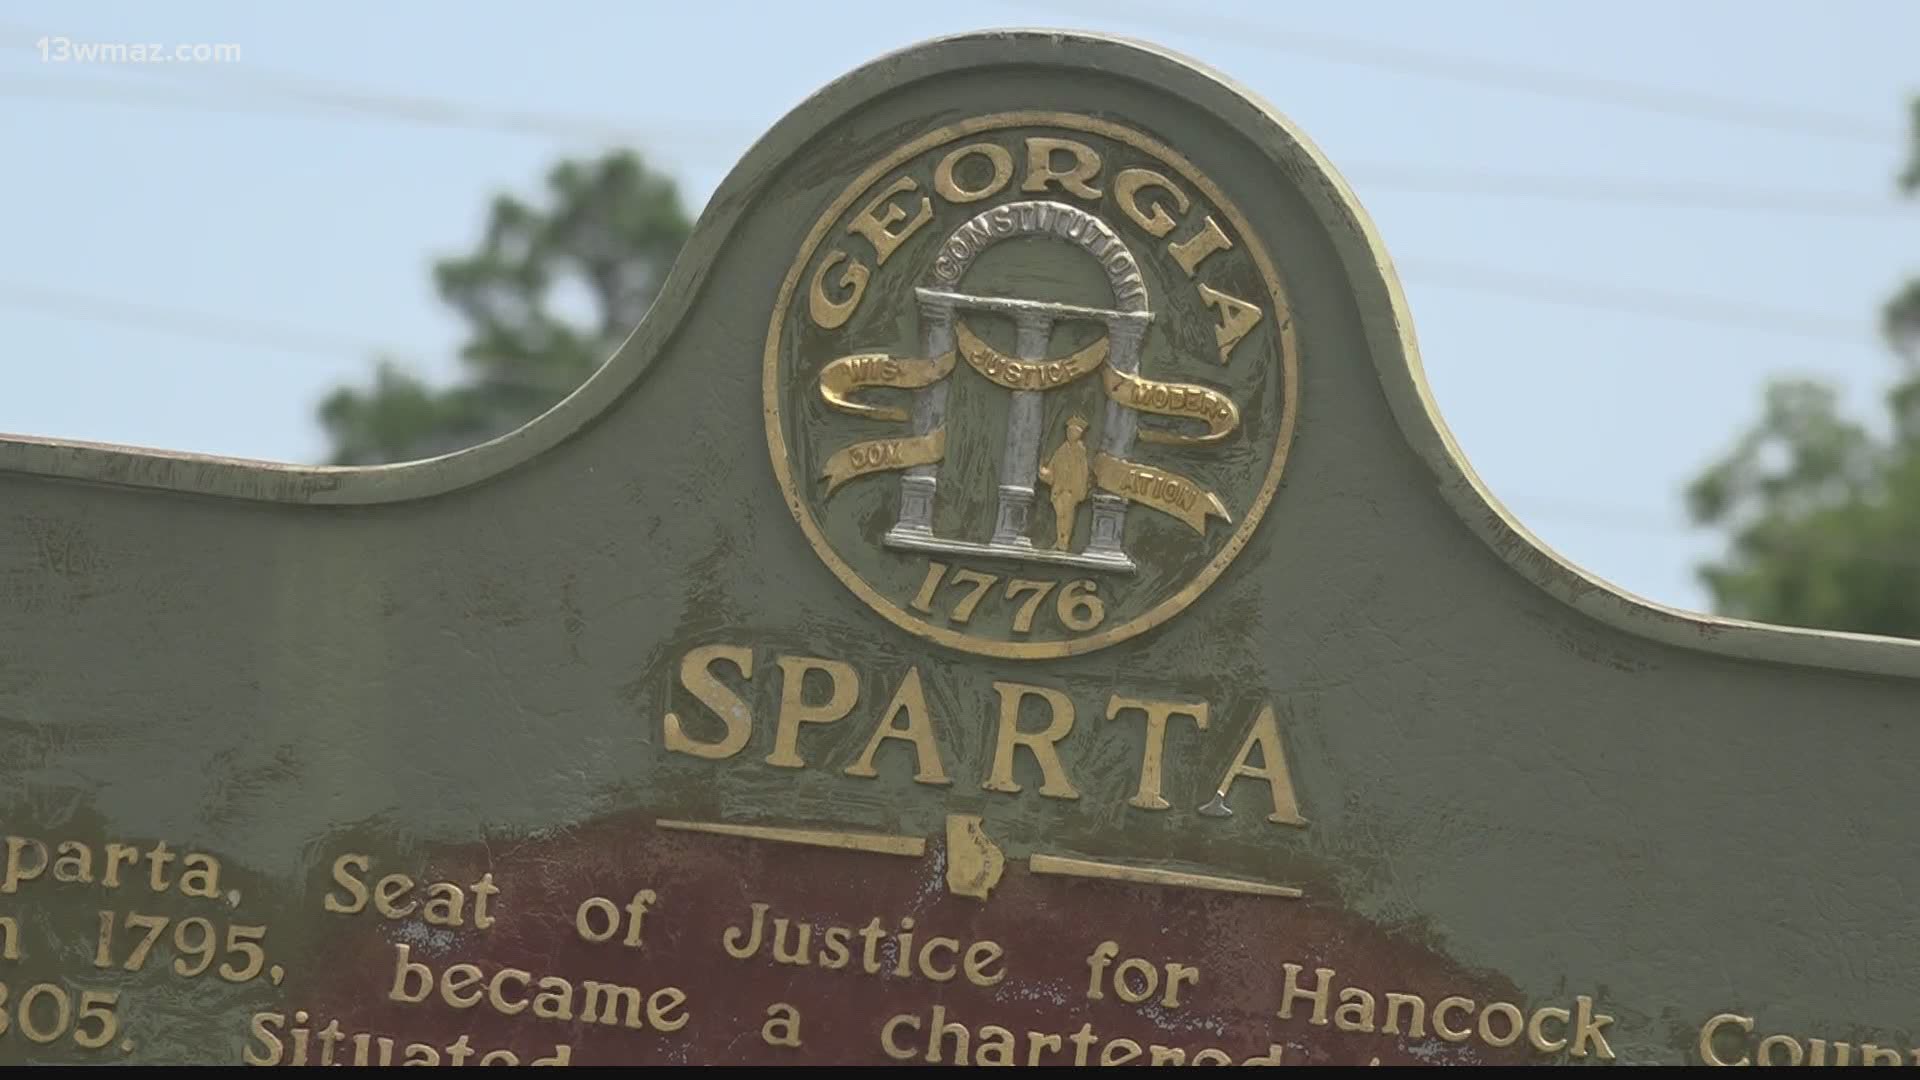 The city of Sparta and Hancock County commission approved a mask ordinance after the state health district says their number of positive cases is decreasing.